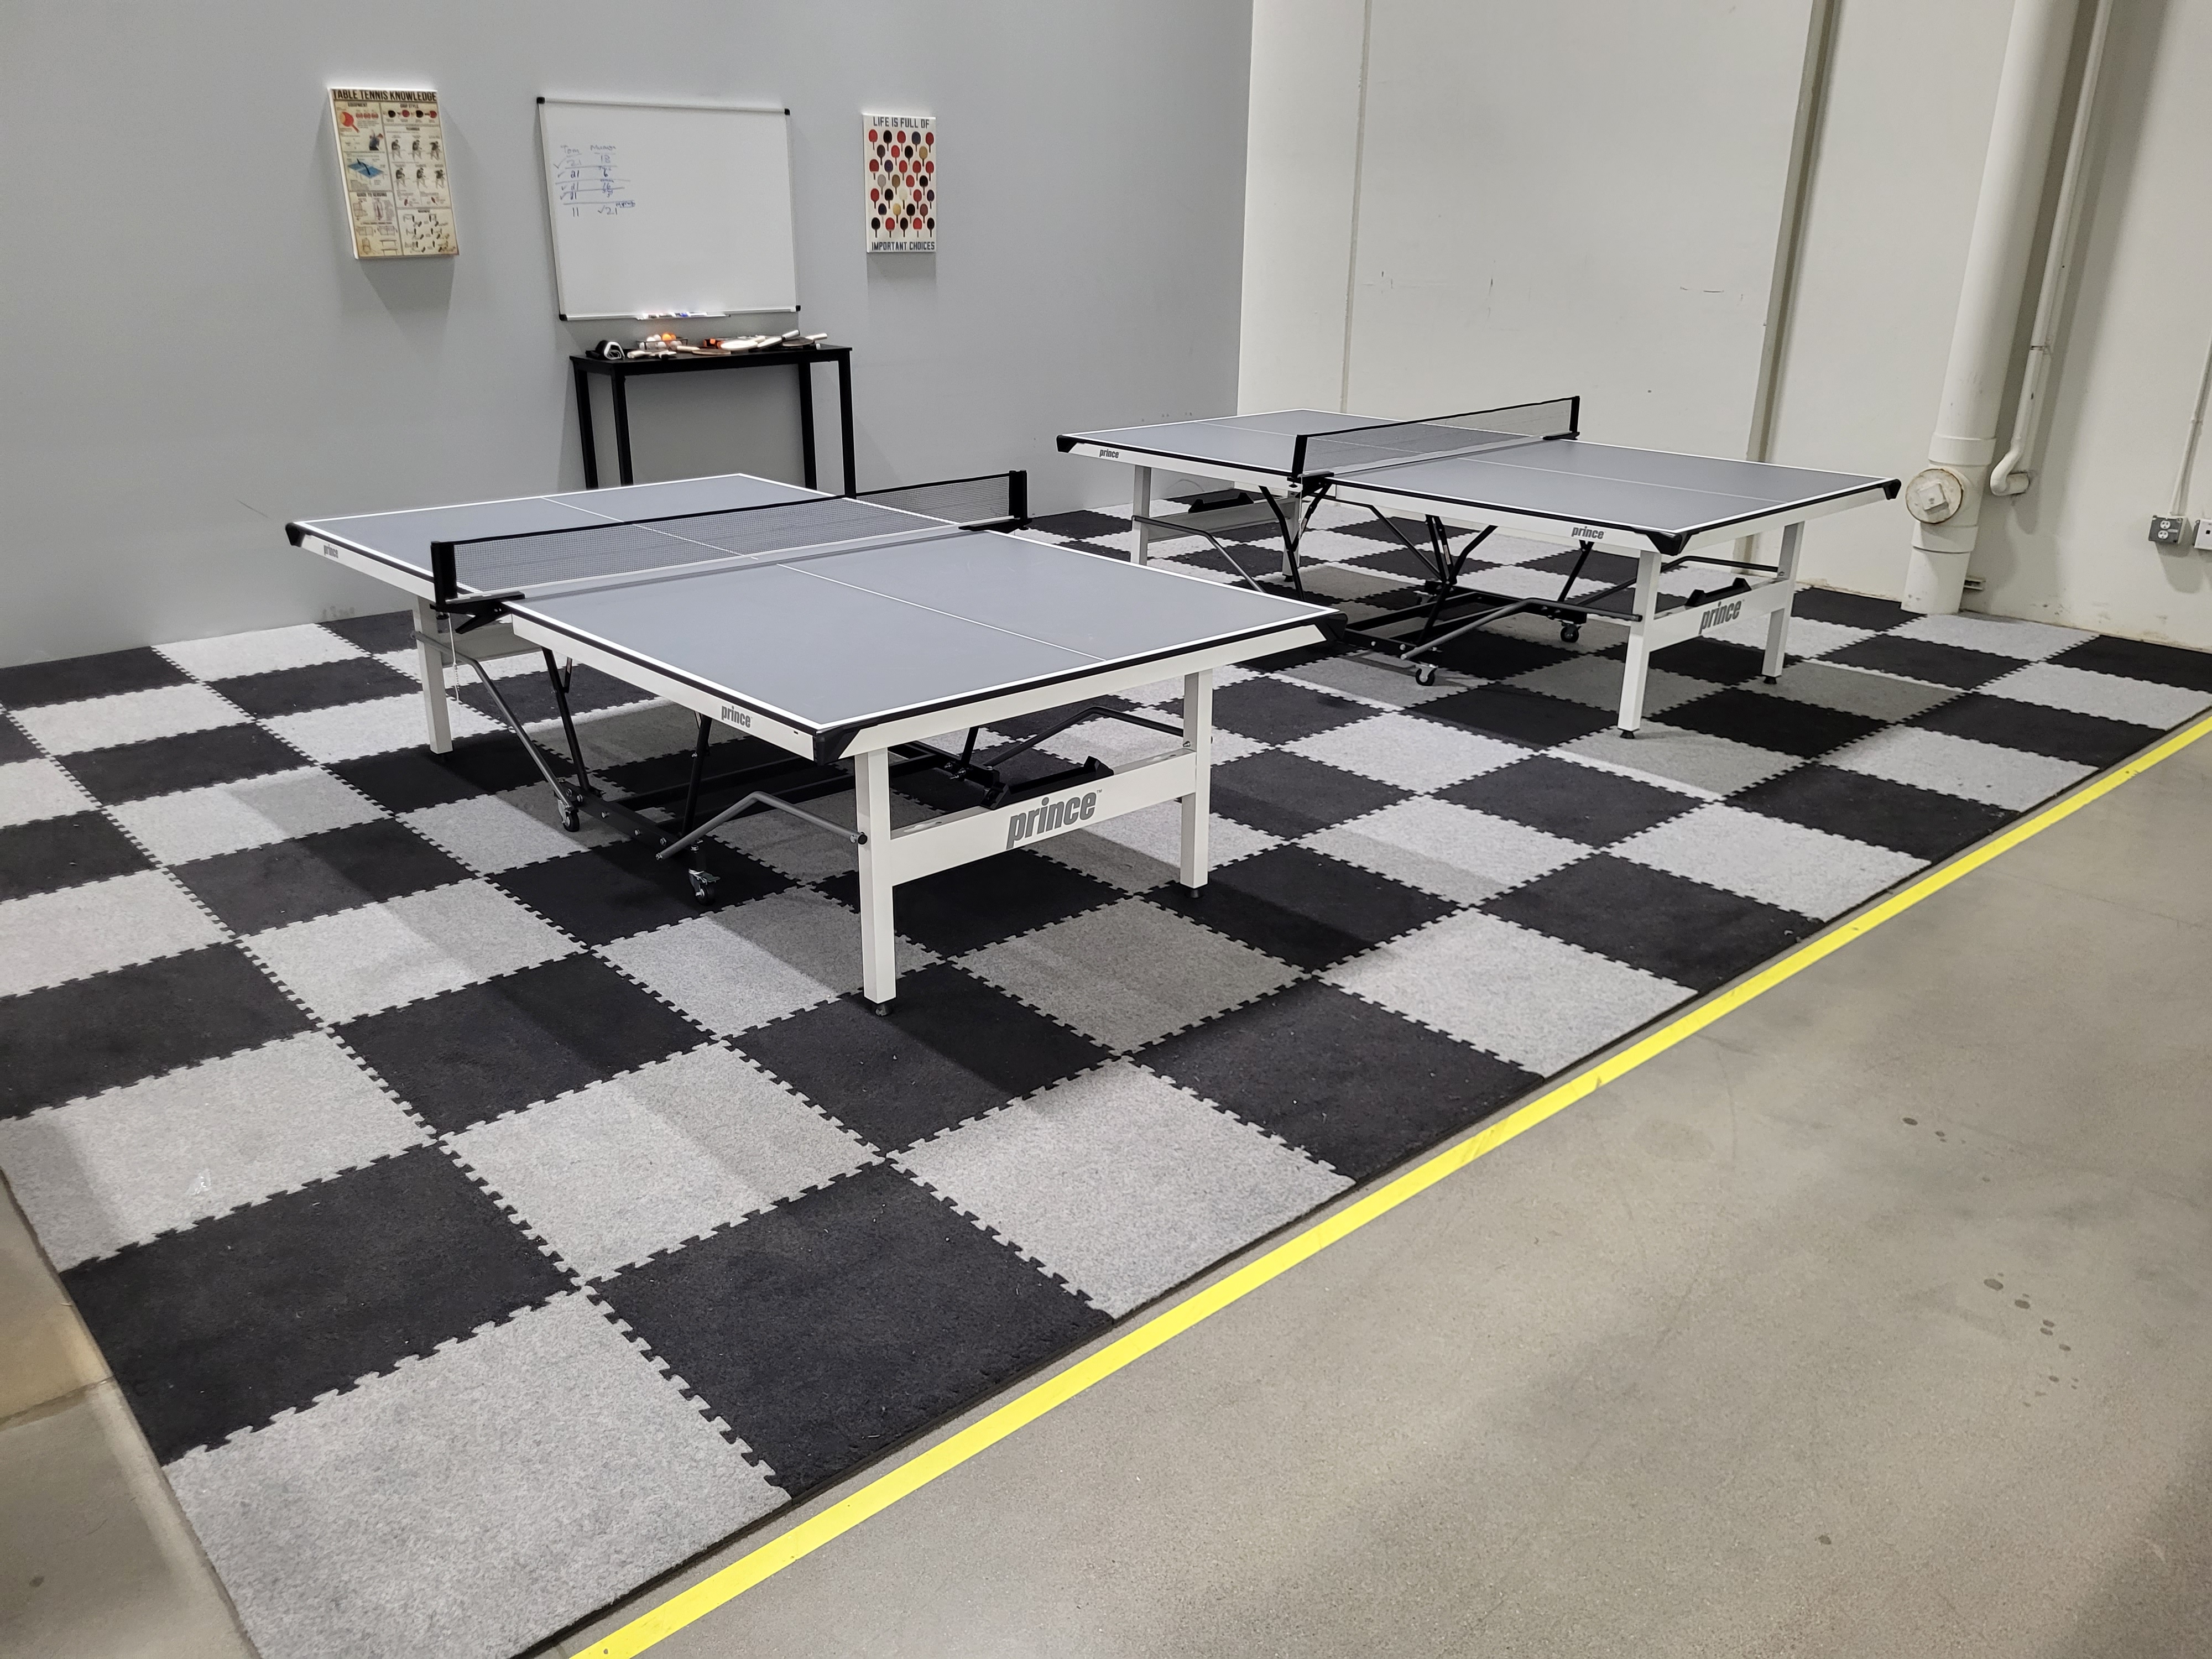 Royal Interlocking Carpet tile in game room with table tennis